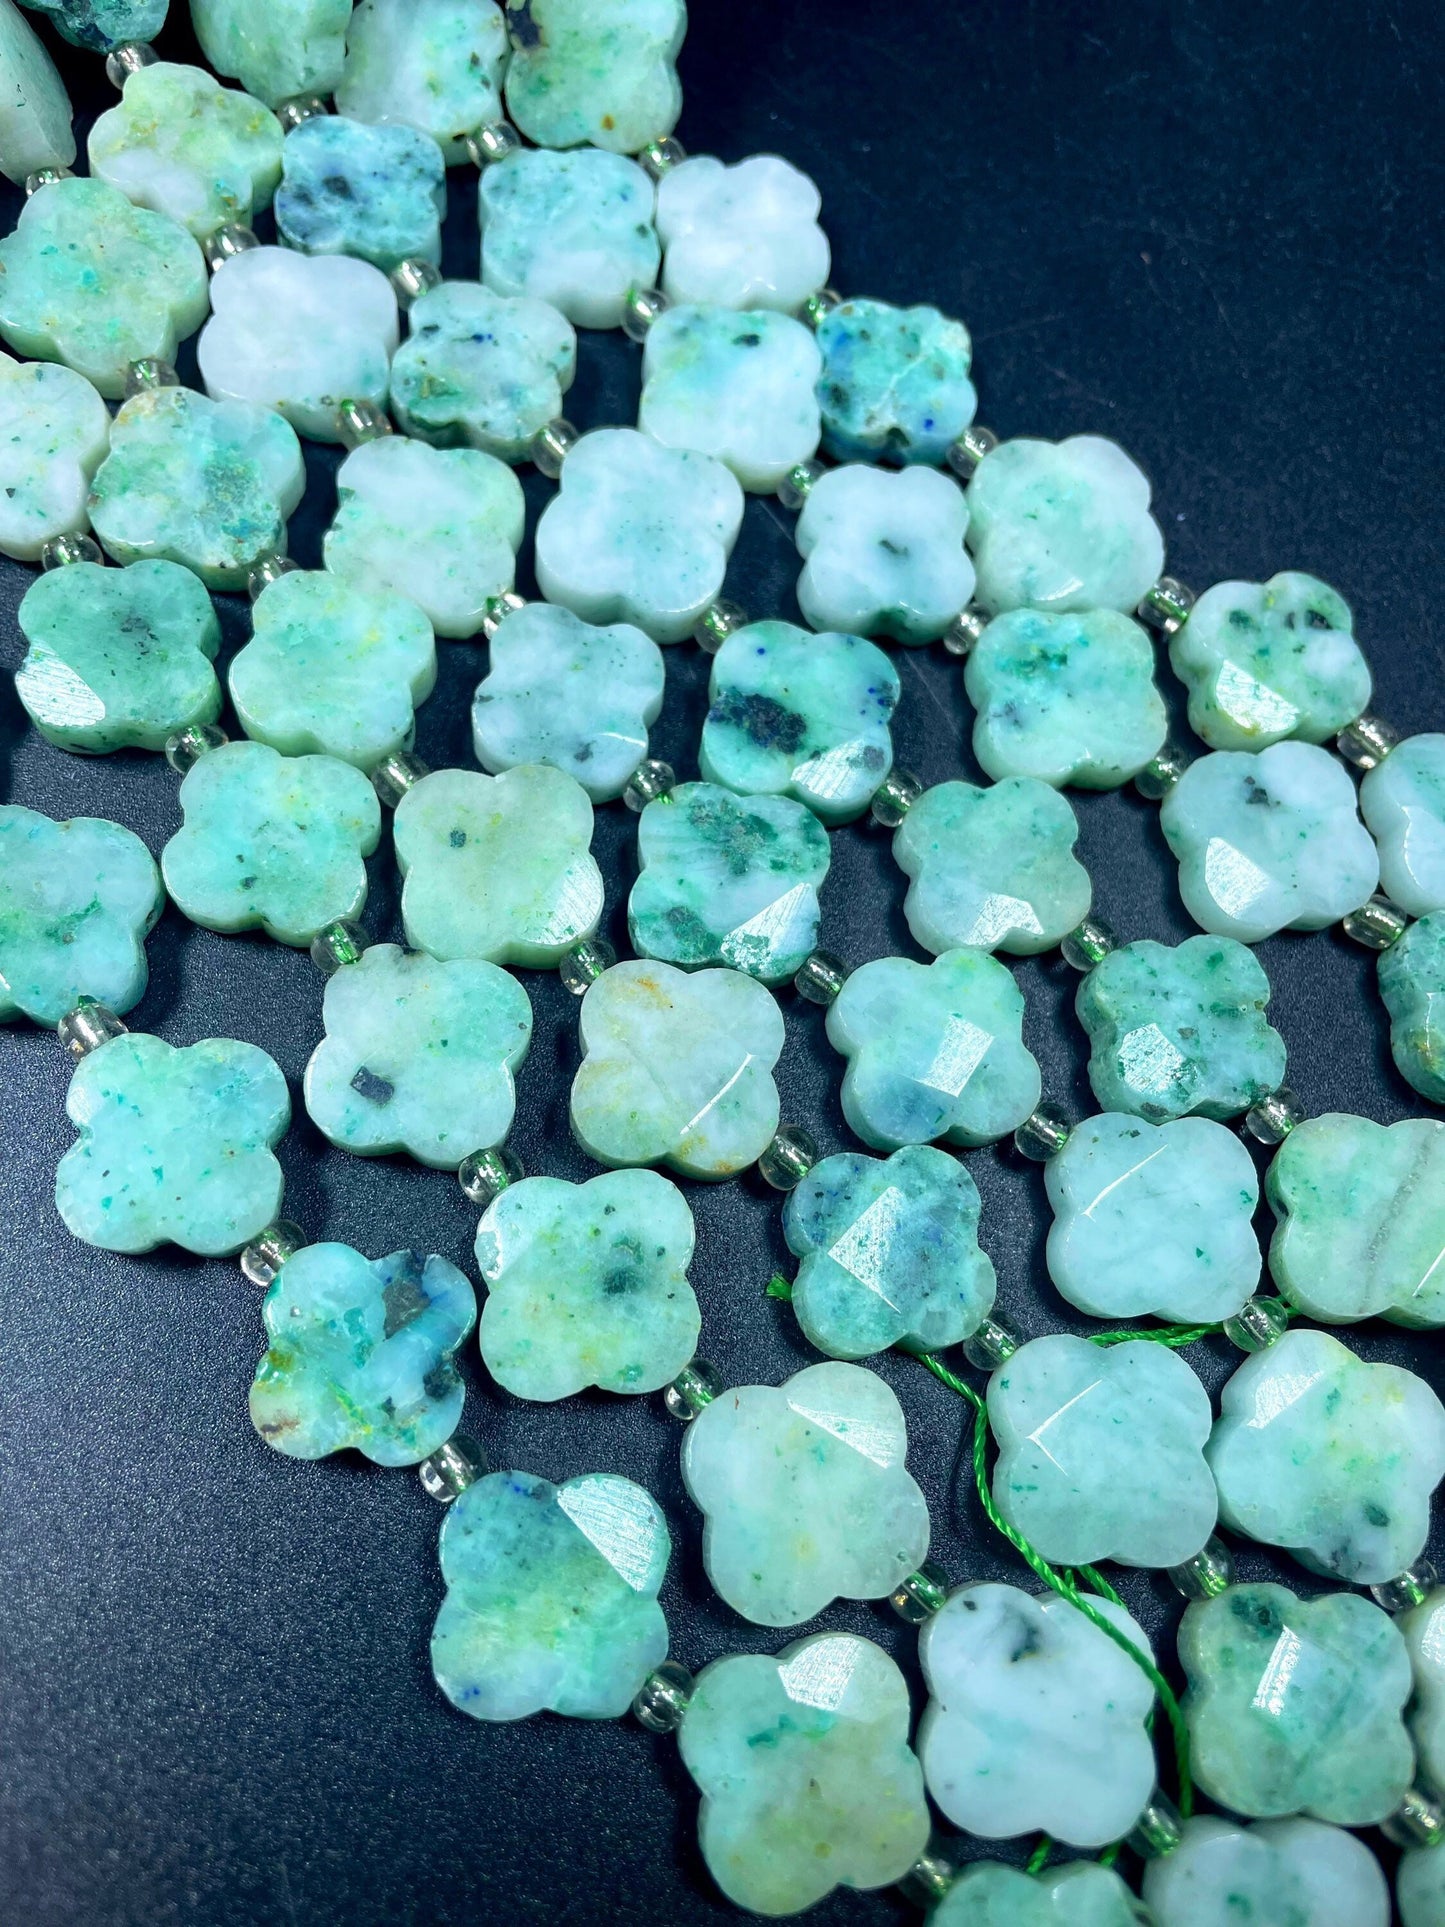 Natural Chrysocolla Gemstone Bead Faceted 16mm Clover Flower Shape, Gorgeous Natural Green Color Chrysocolla Gemstone Bead